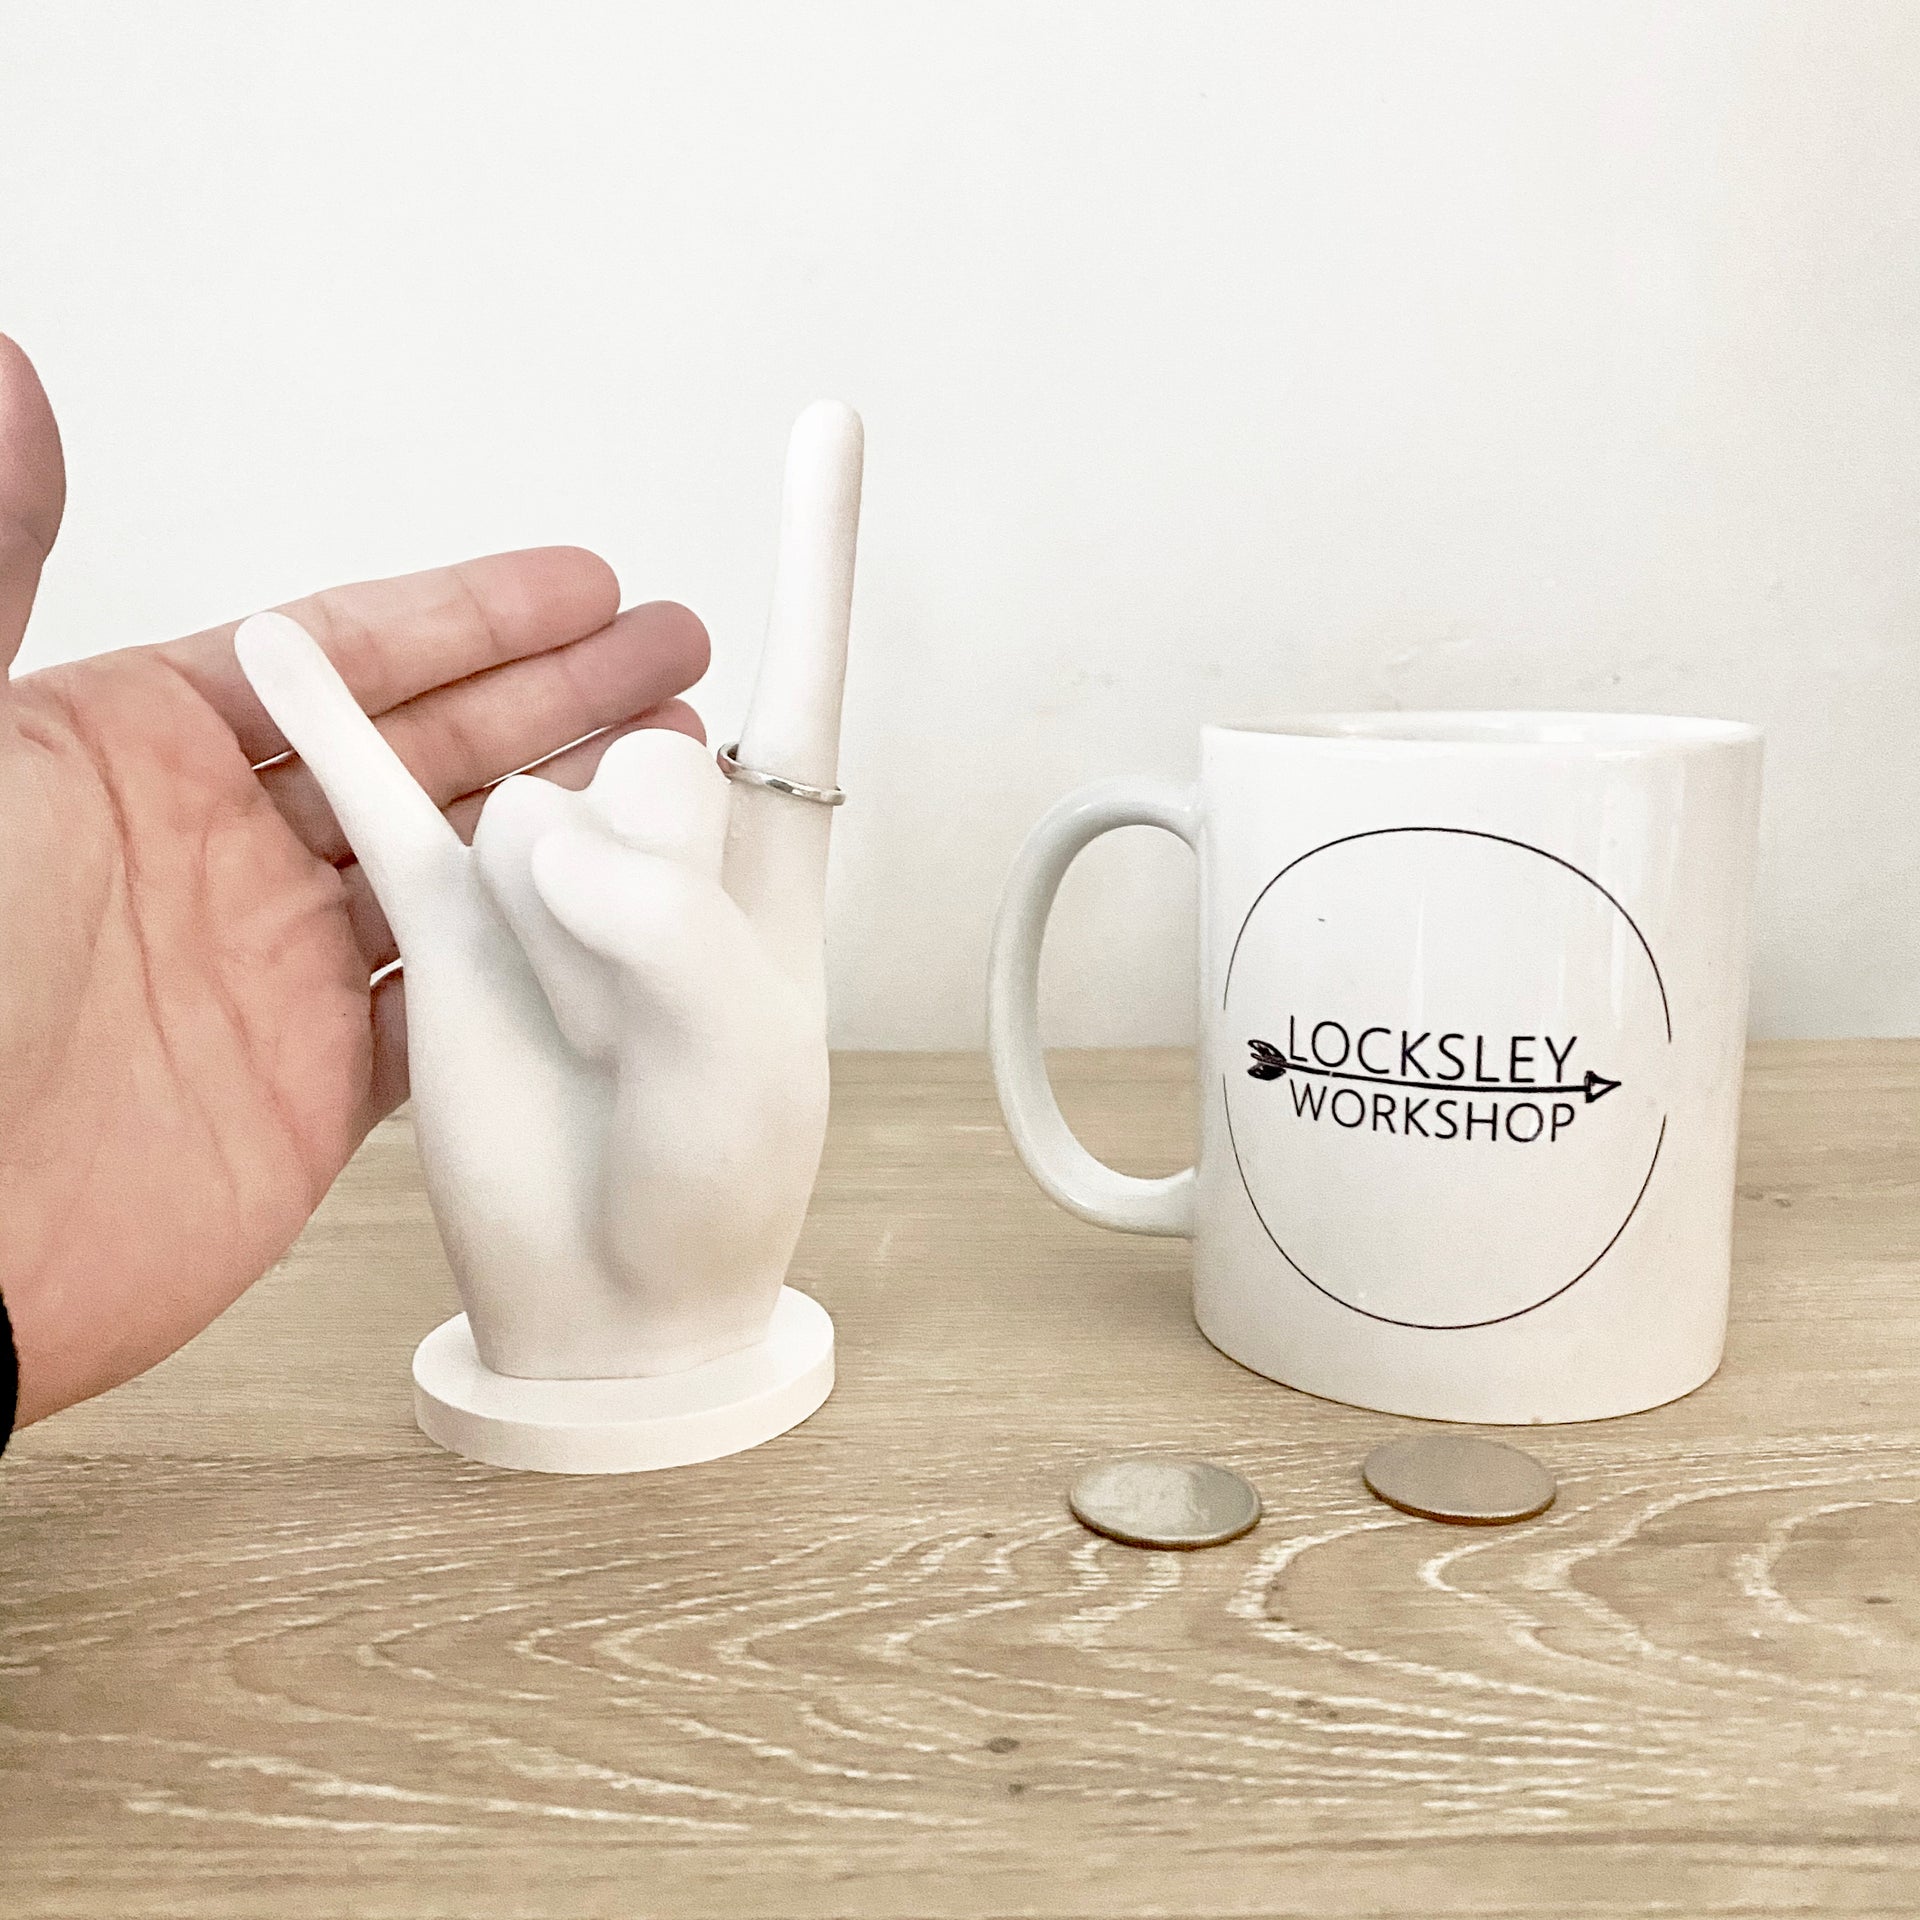 size comparison image for the ring holder. includes a hand, mug, and quarter for reference.